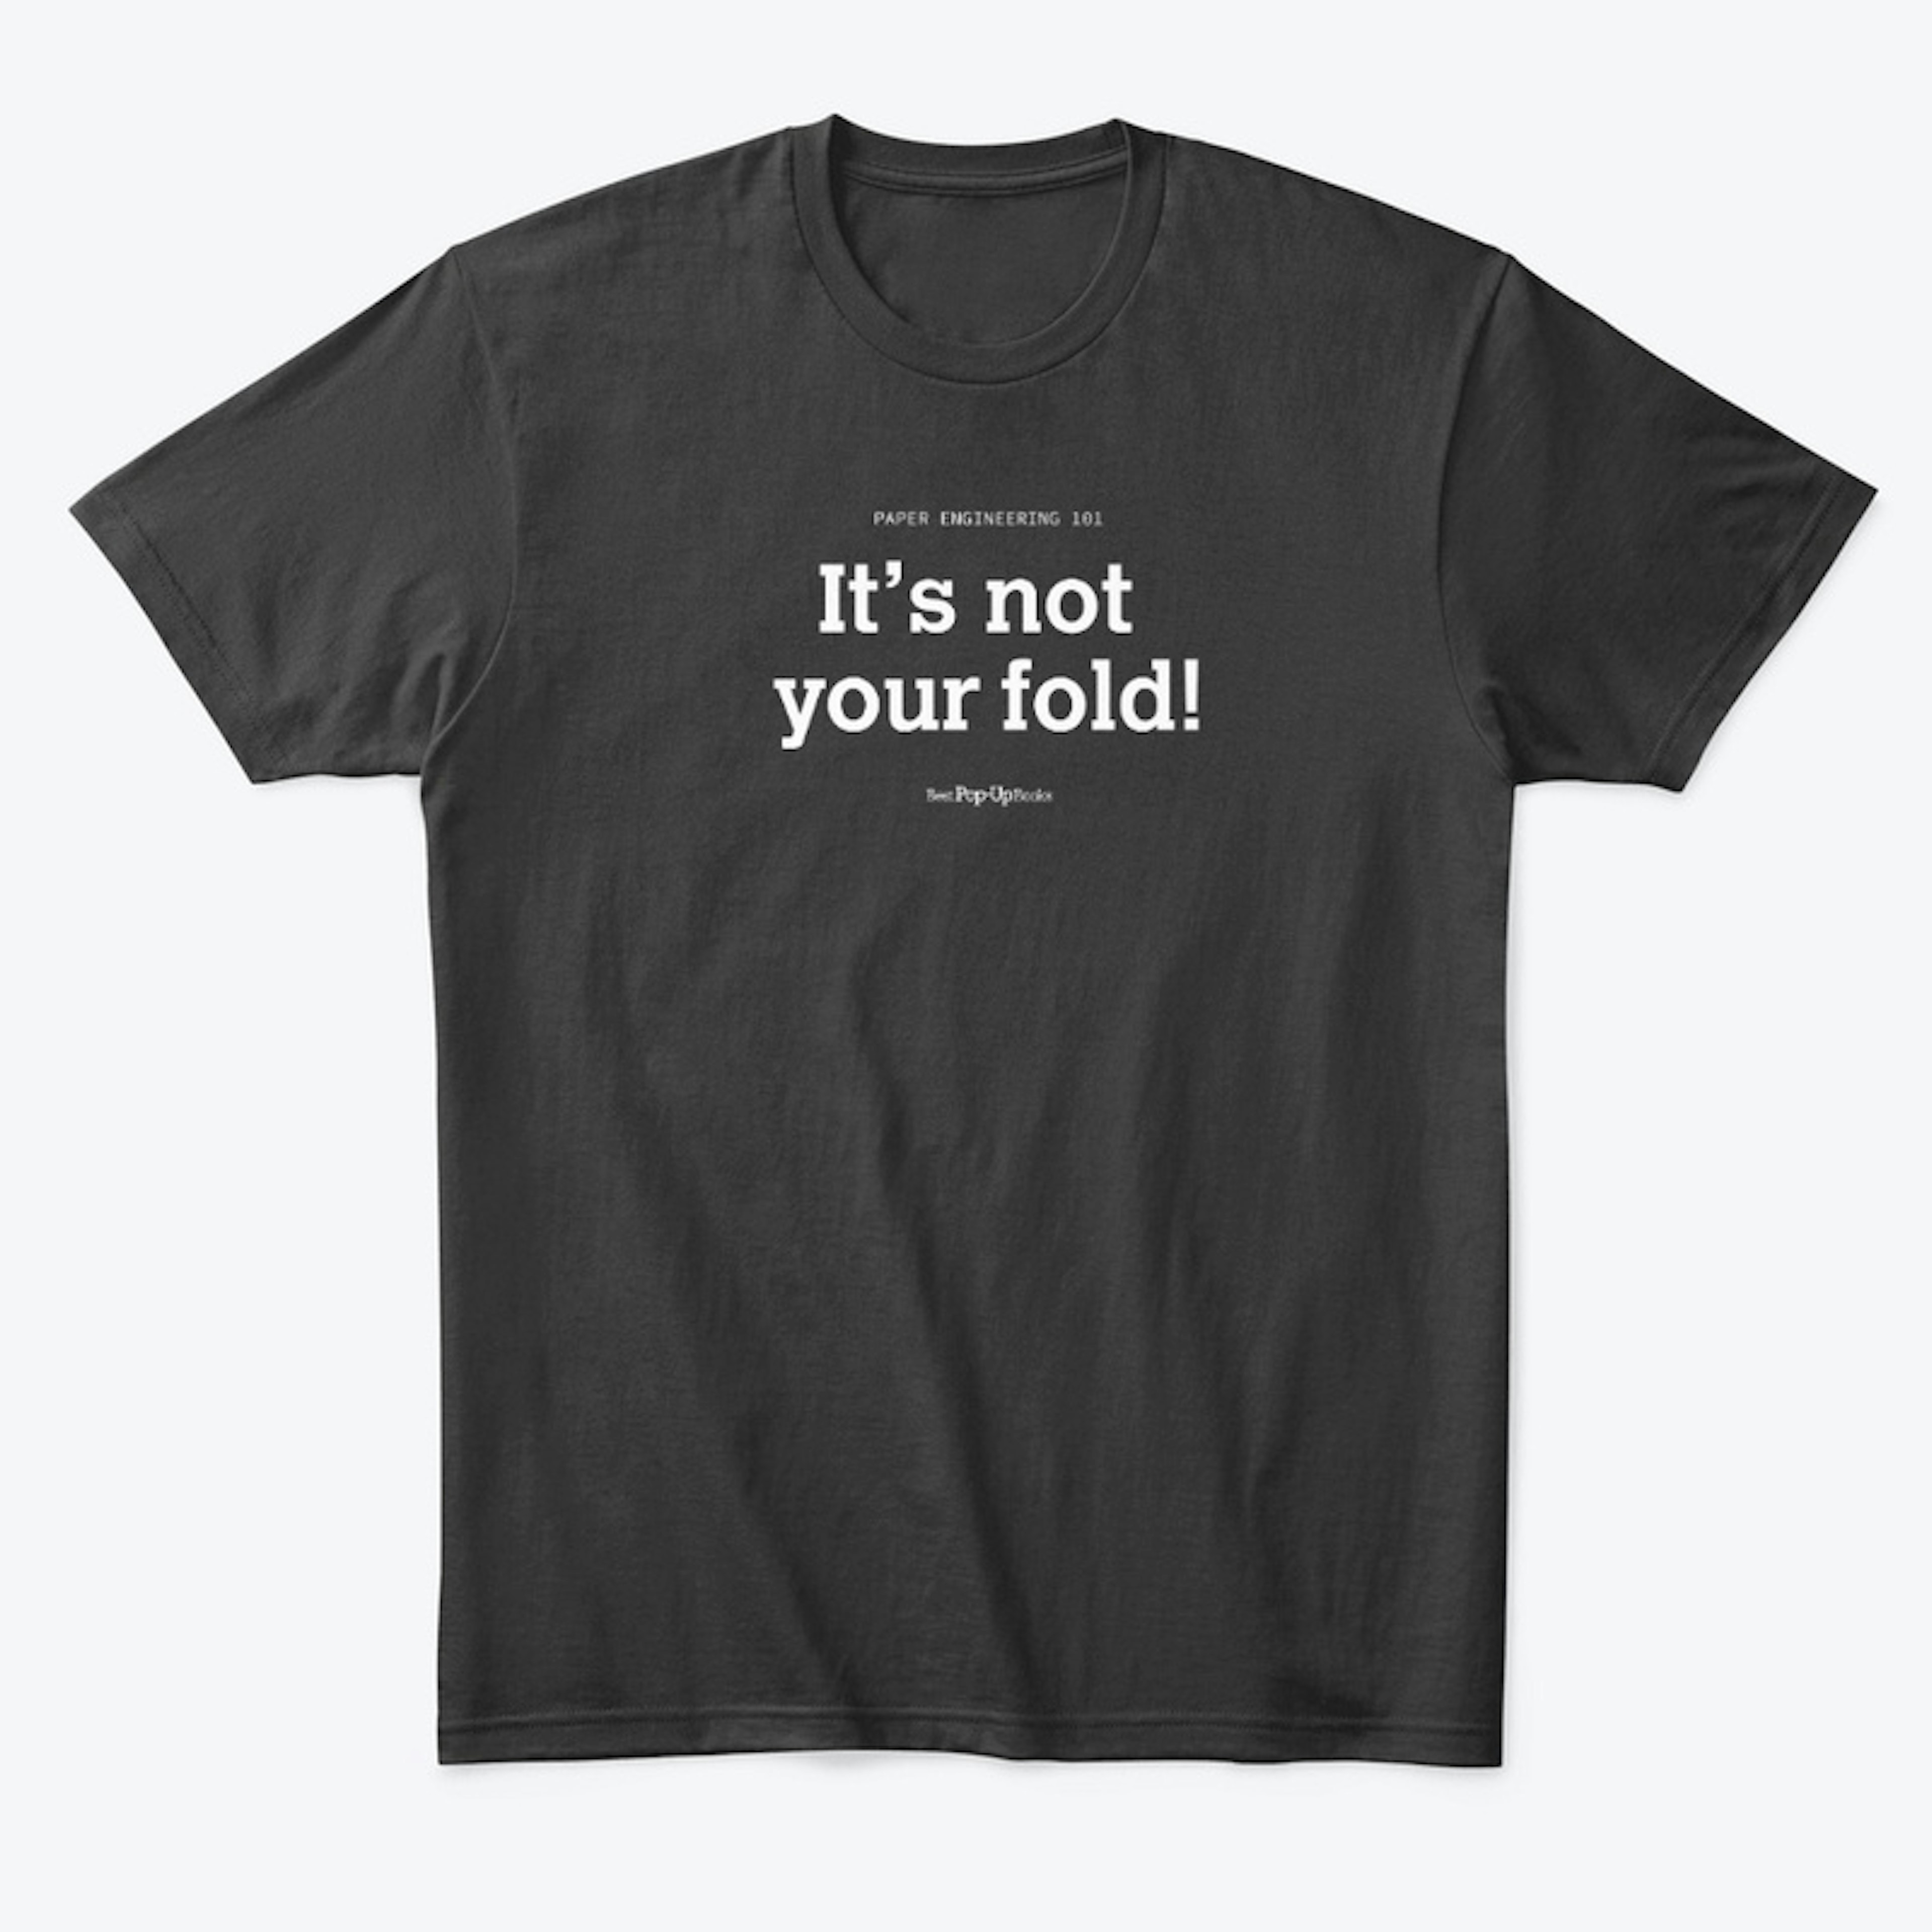 It's not your fold T-shirt Black